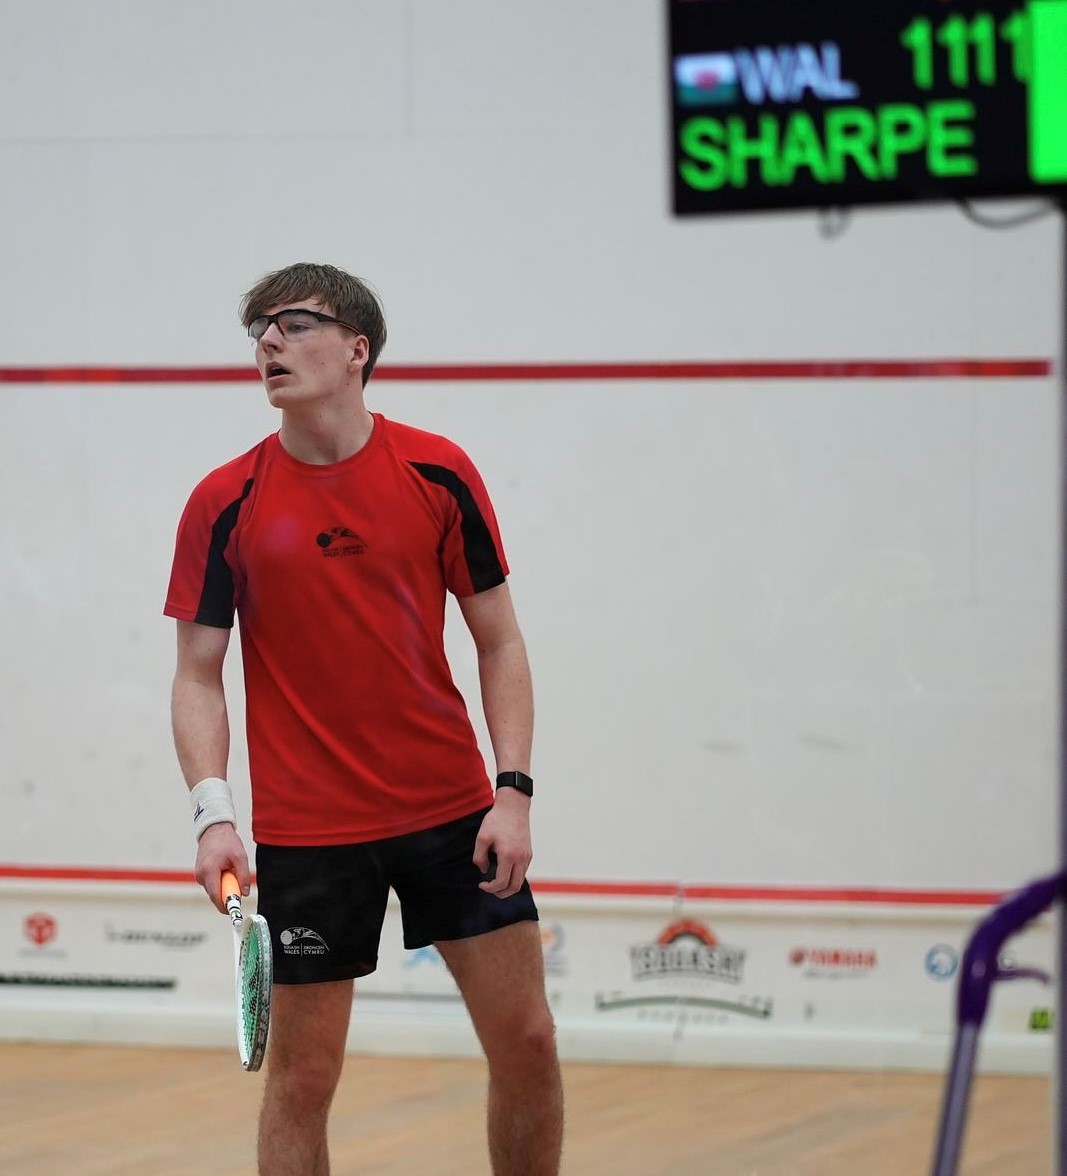 exeter squash player